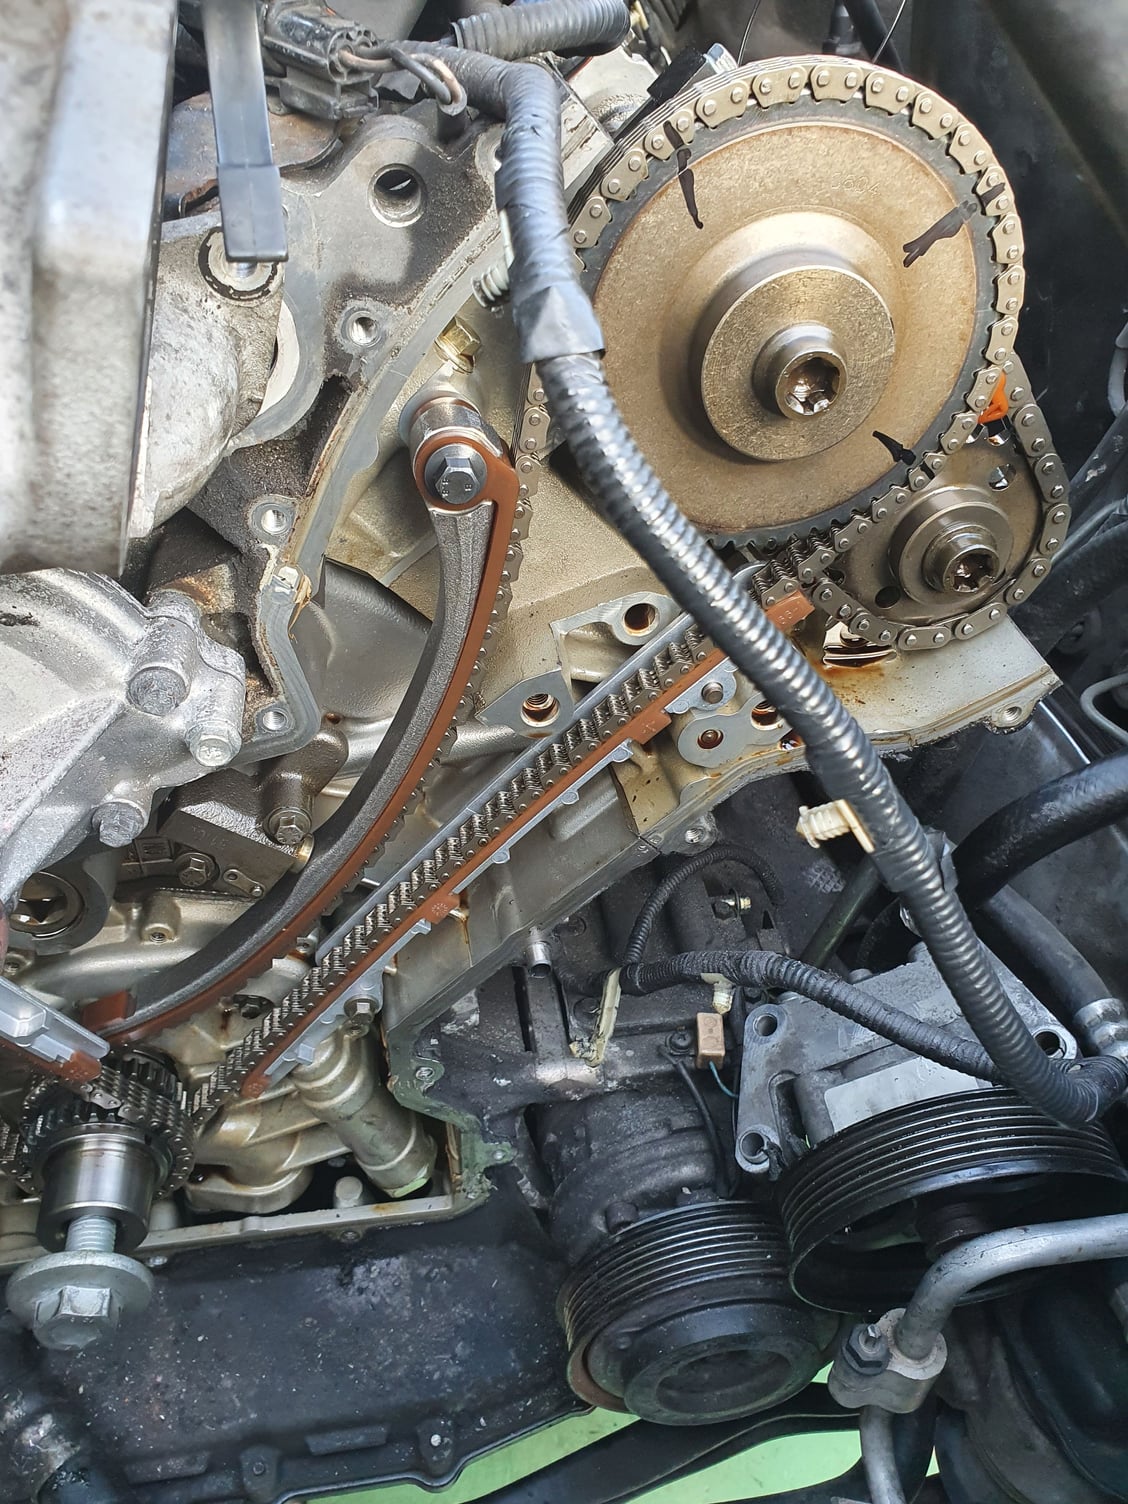 Help with correct part numbers for timing chain tensioner replacement ...